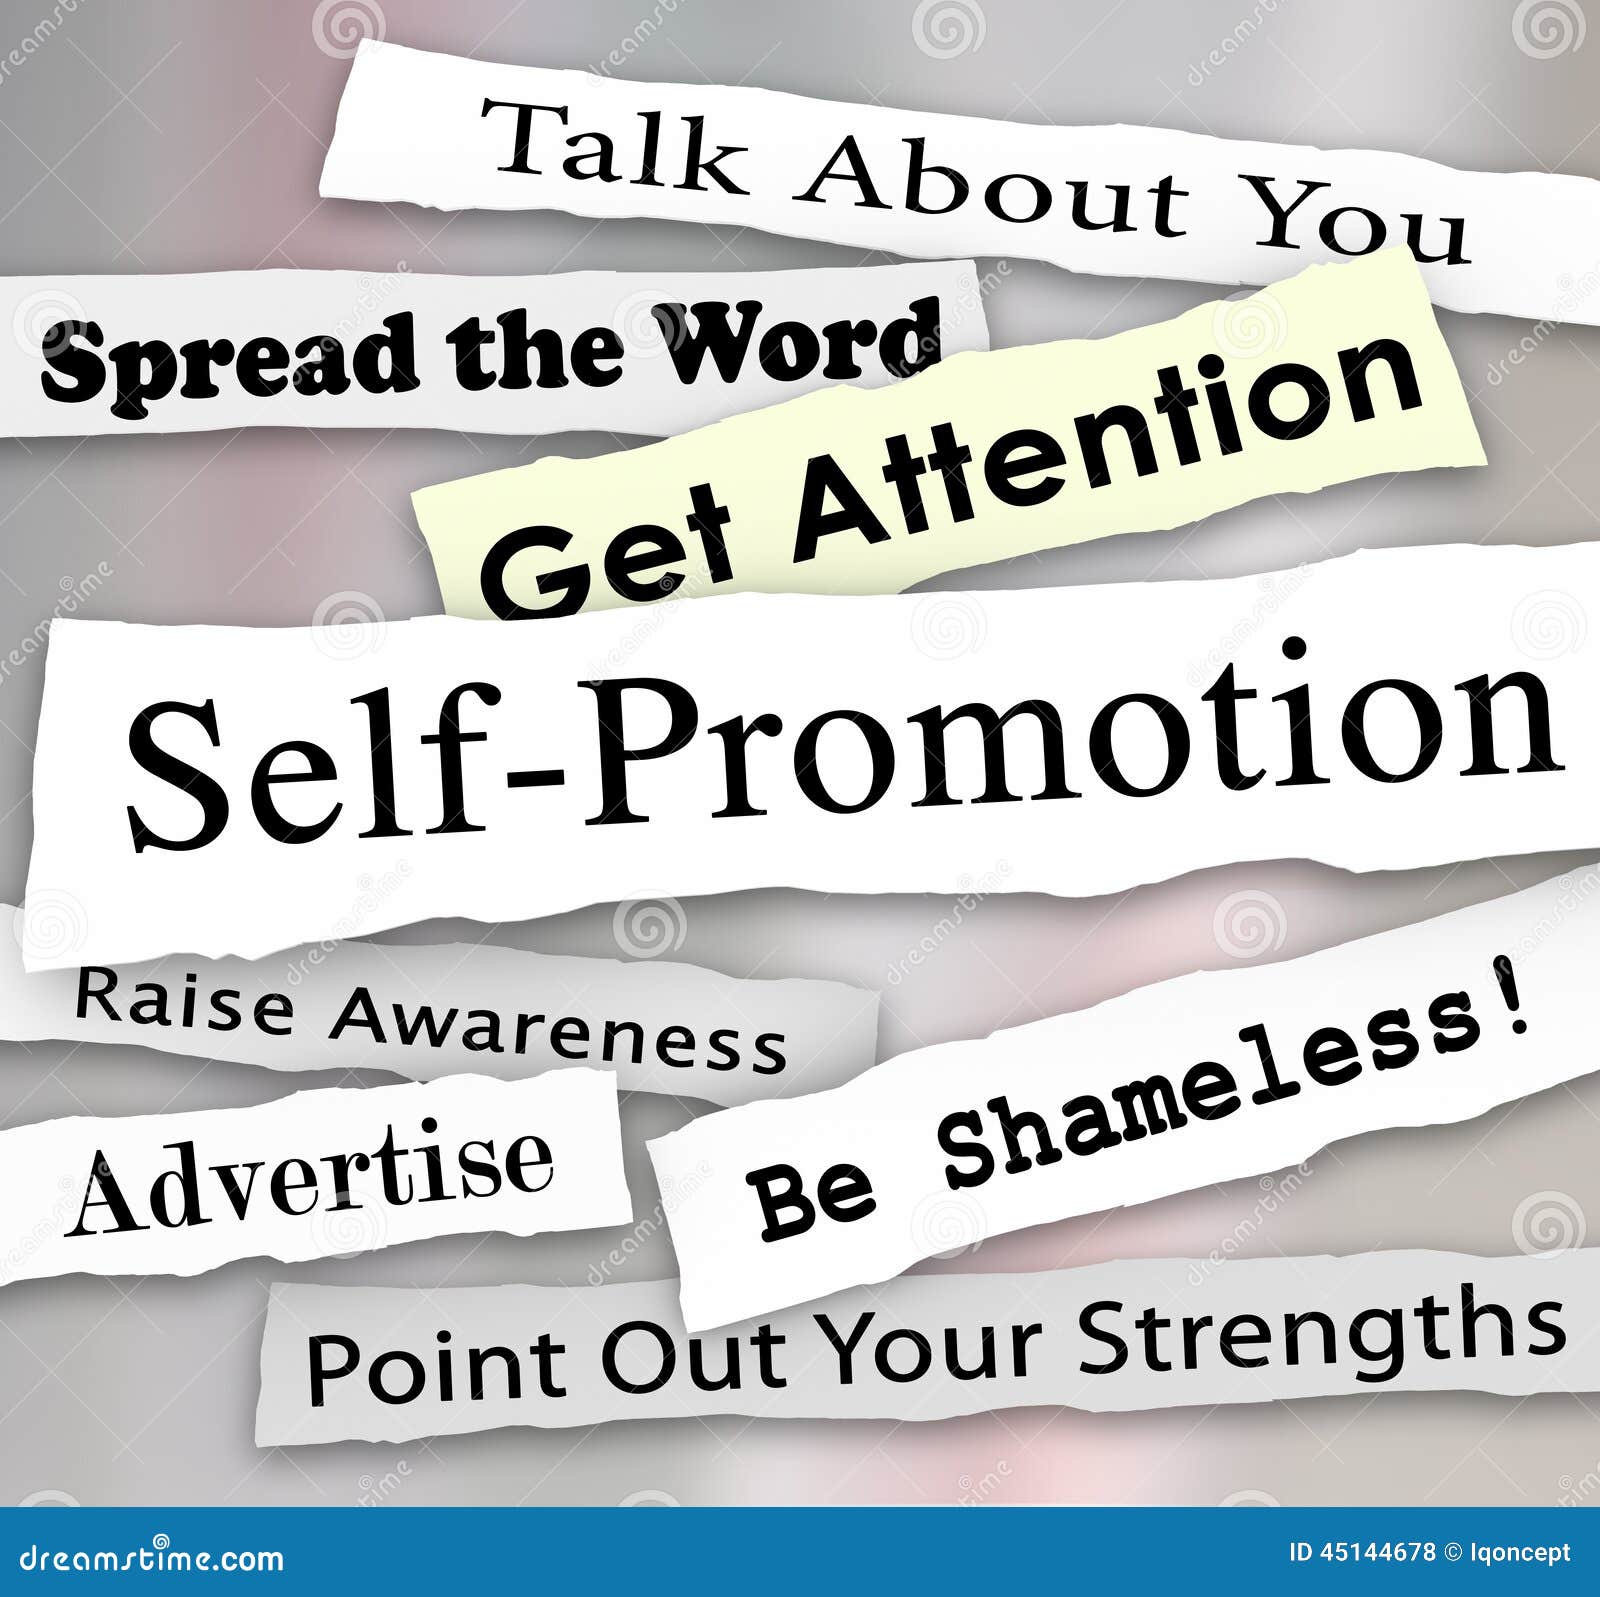 self-promotion headlines marketing publicity attention